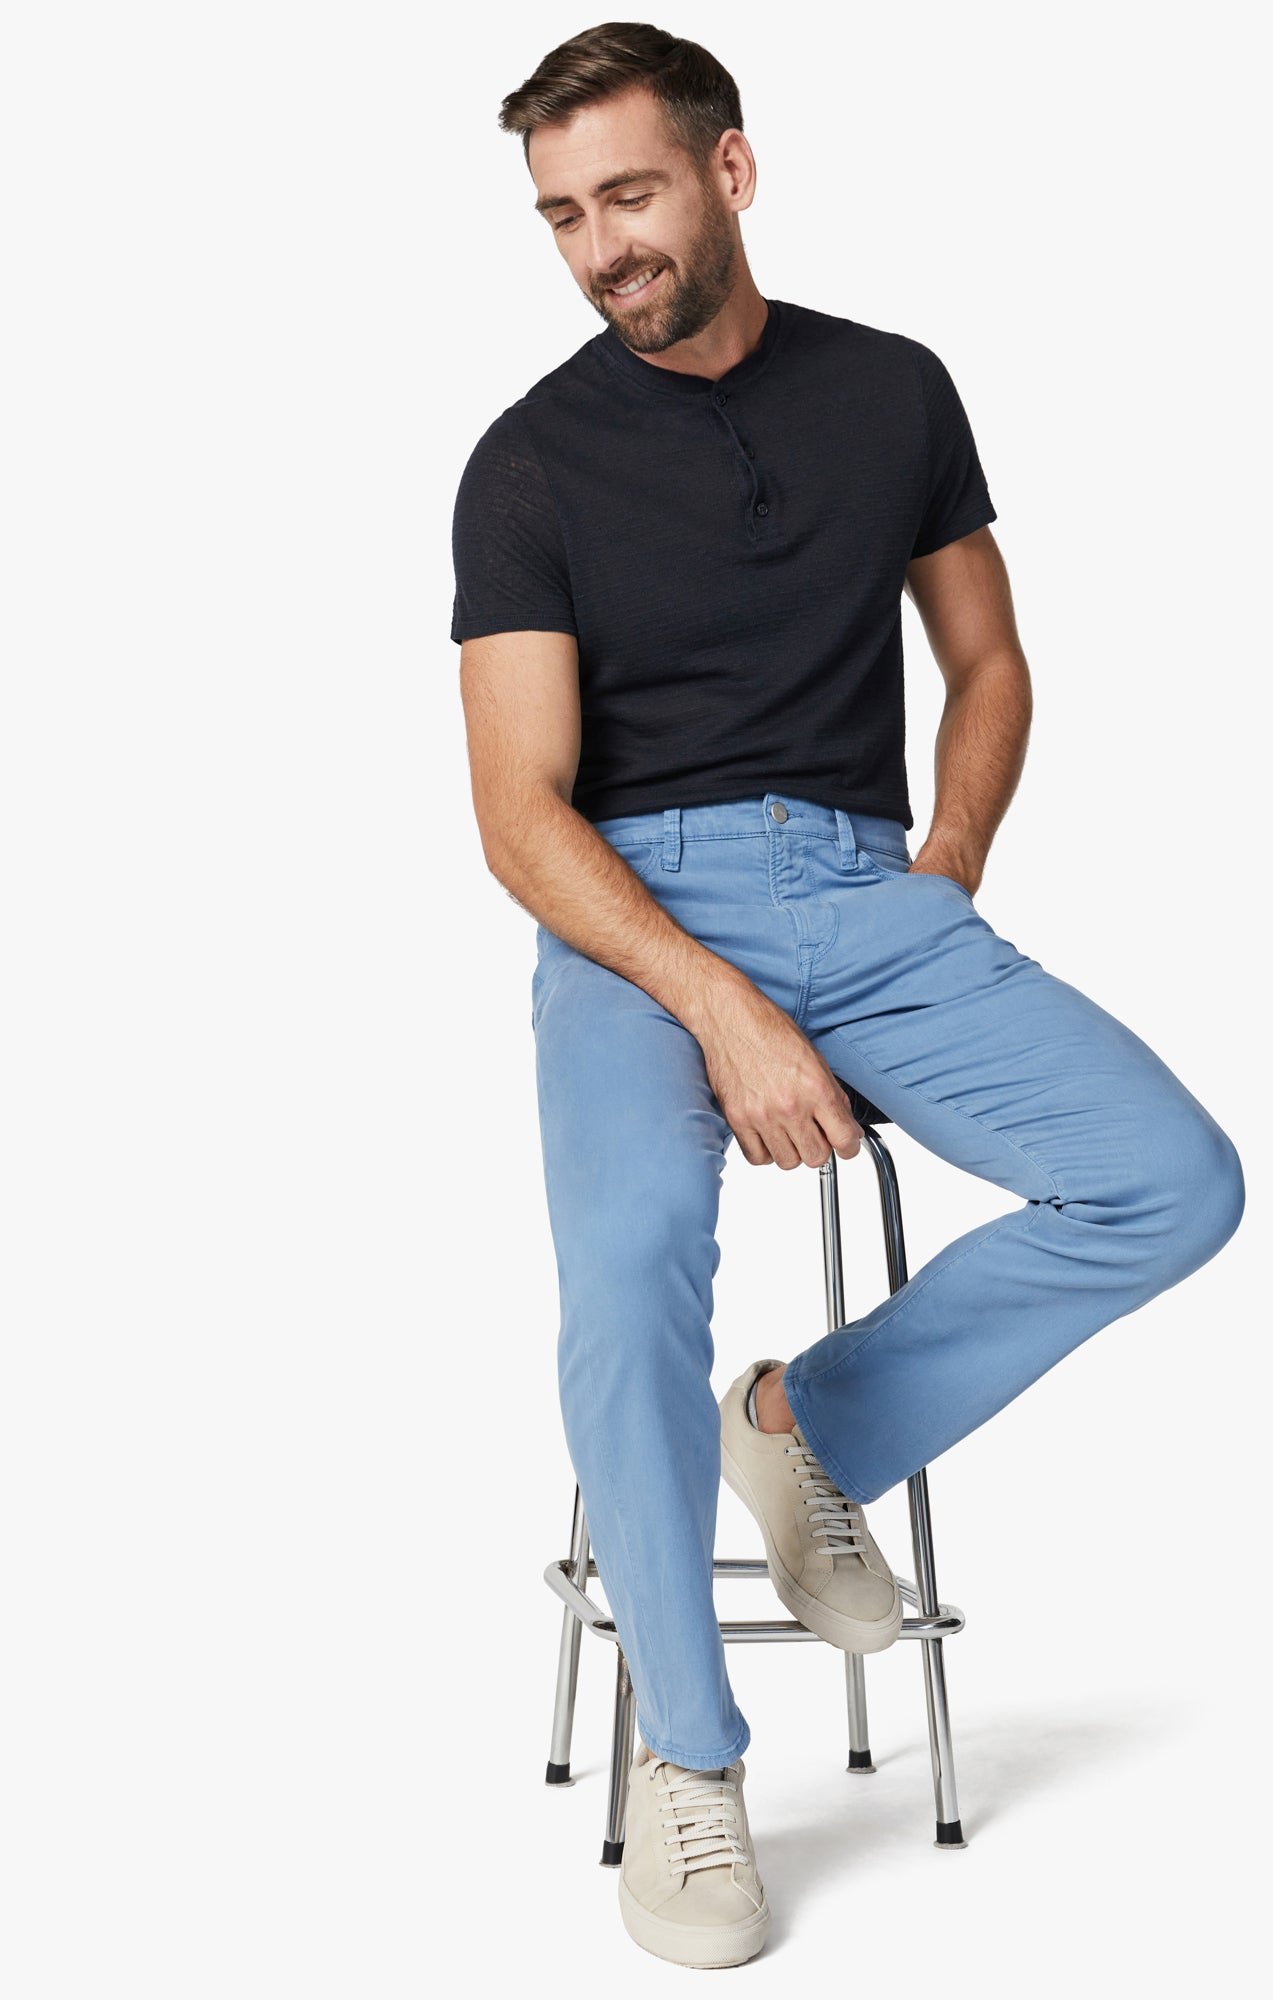 Charisma Relaxed Straight Leg Pants In Quiet Harbor Twill